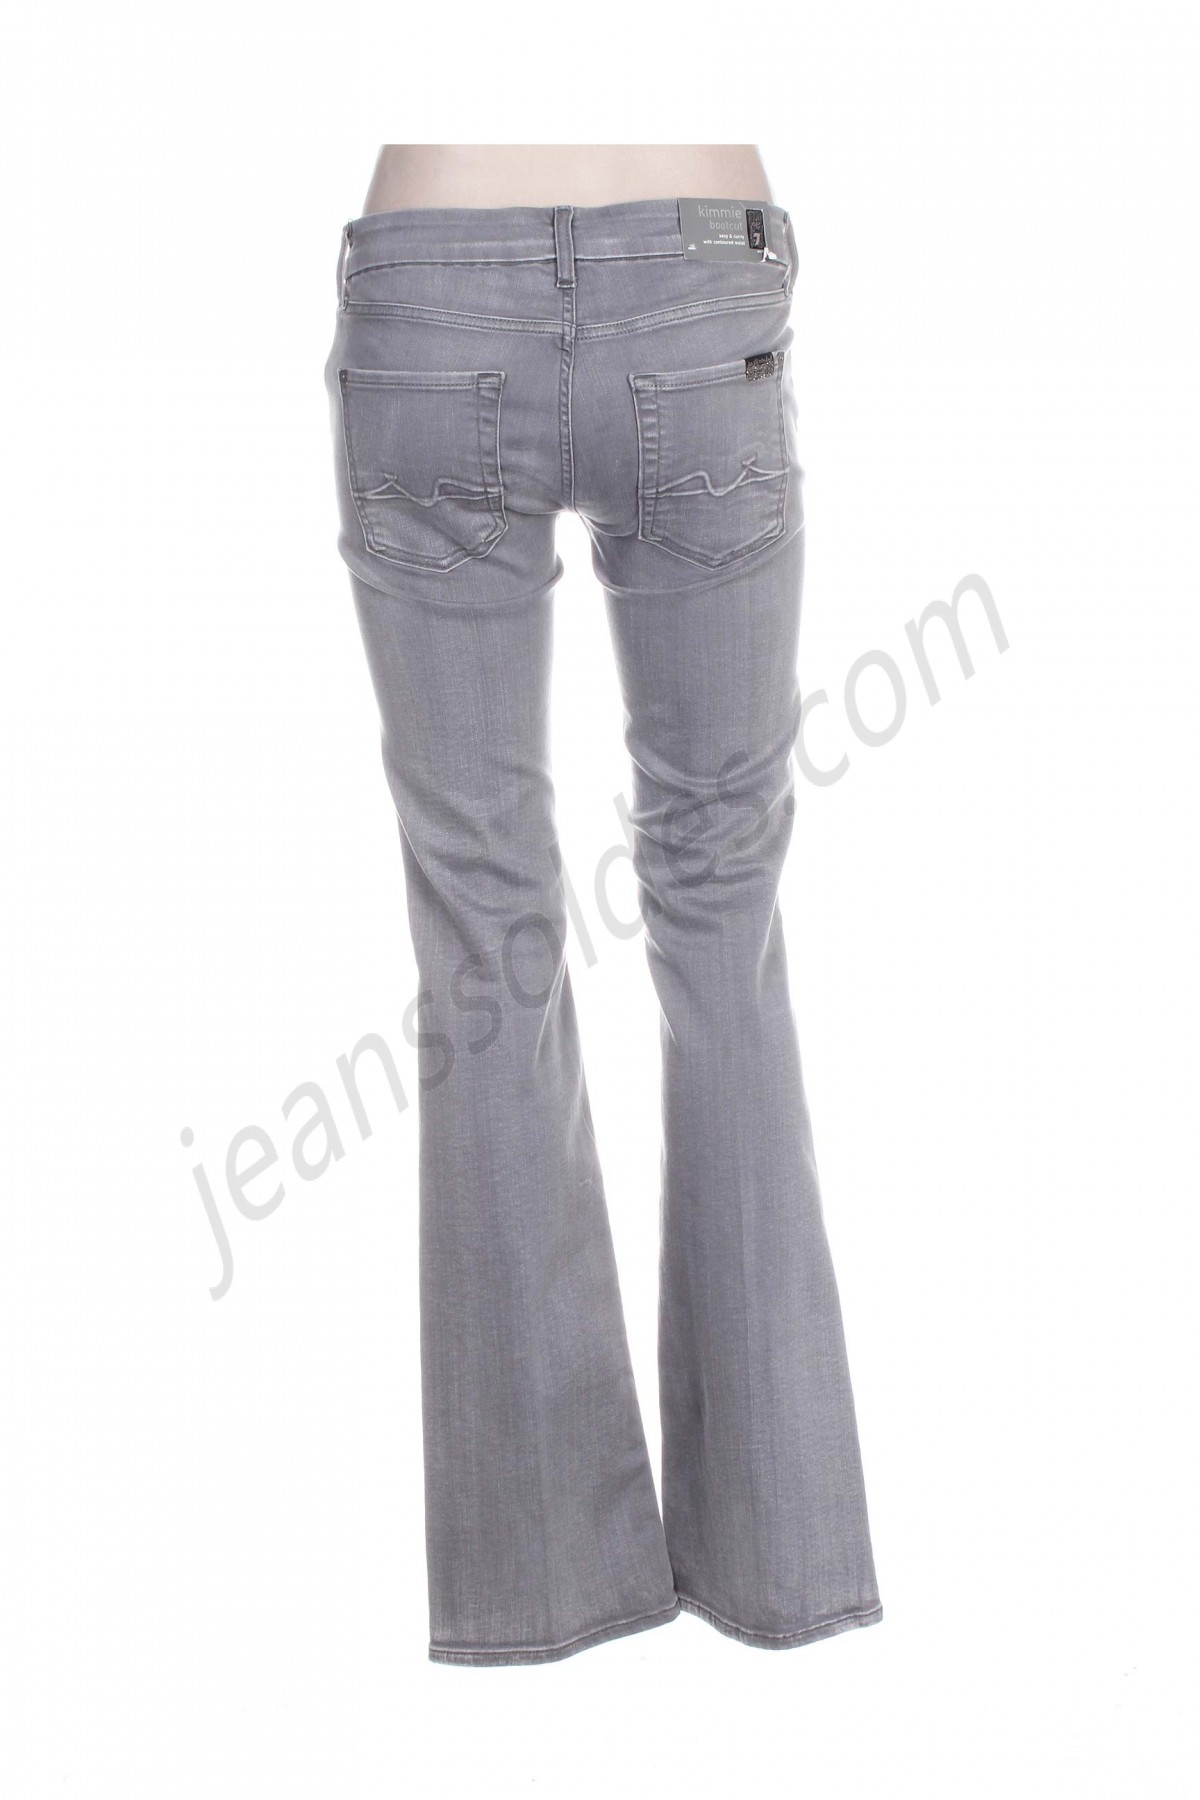 for all mankind-Jeans coupe droite prix d’amis - -1